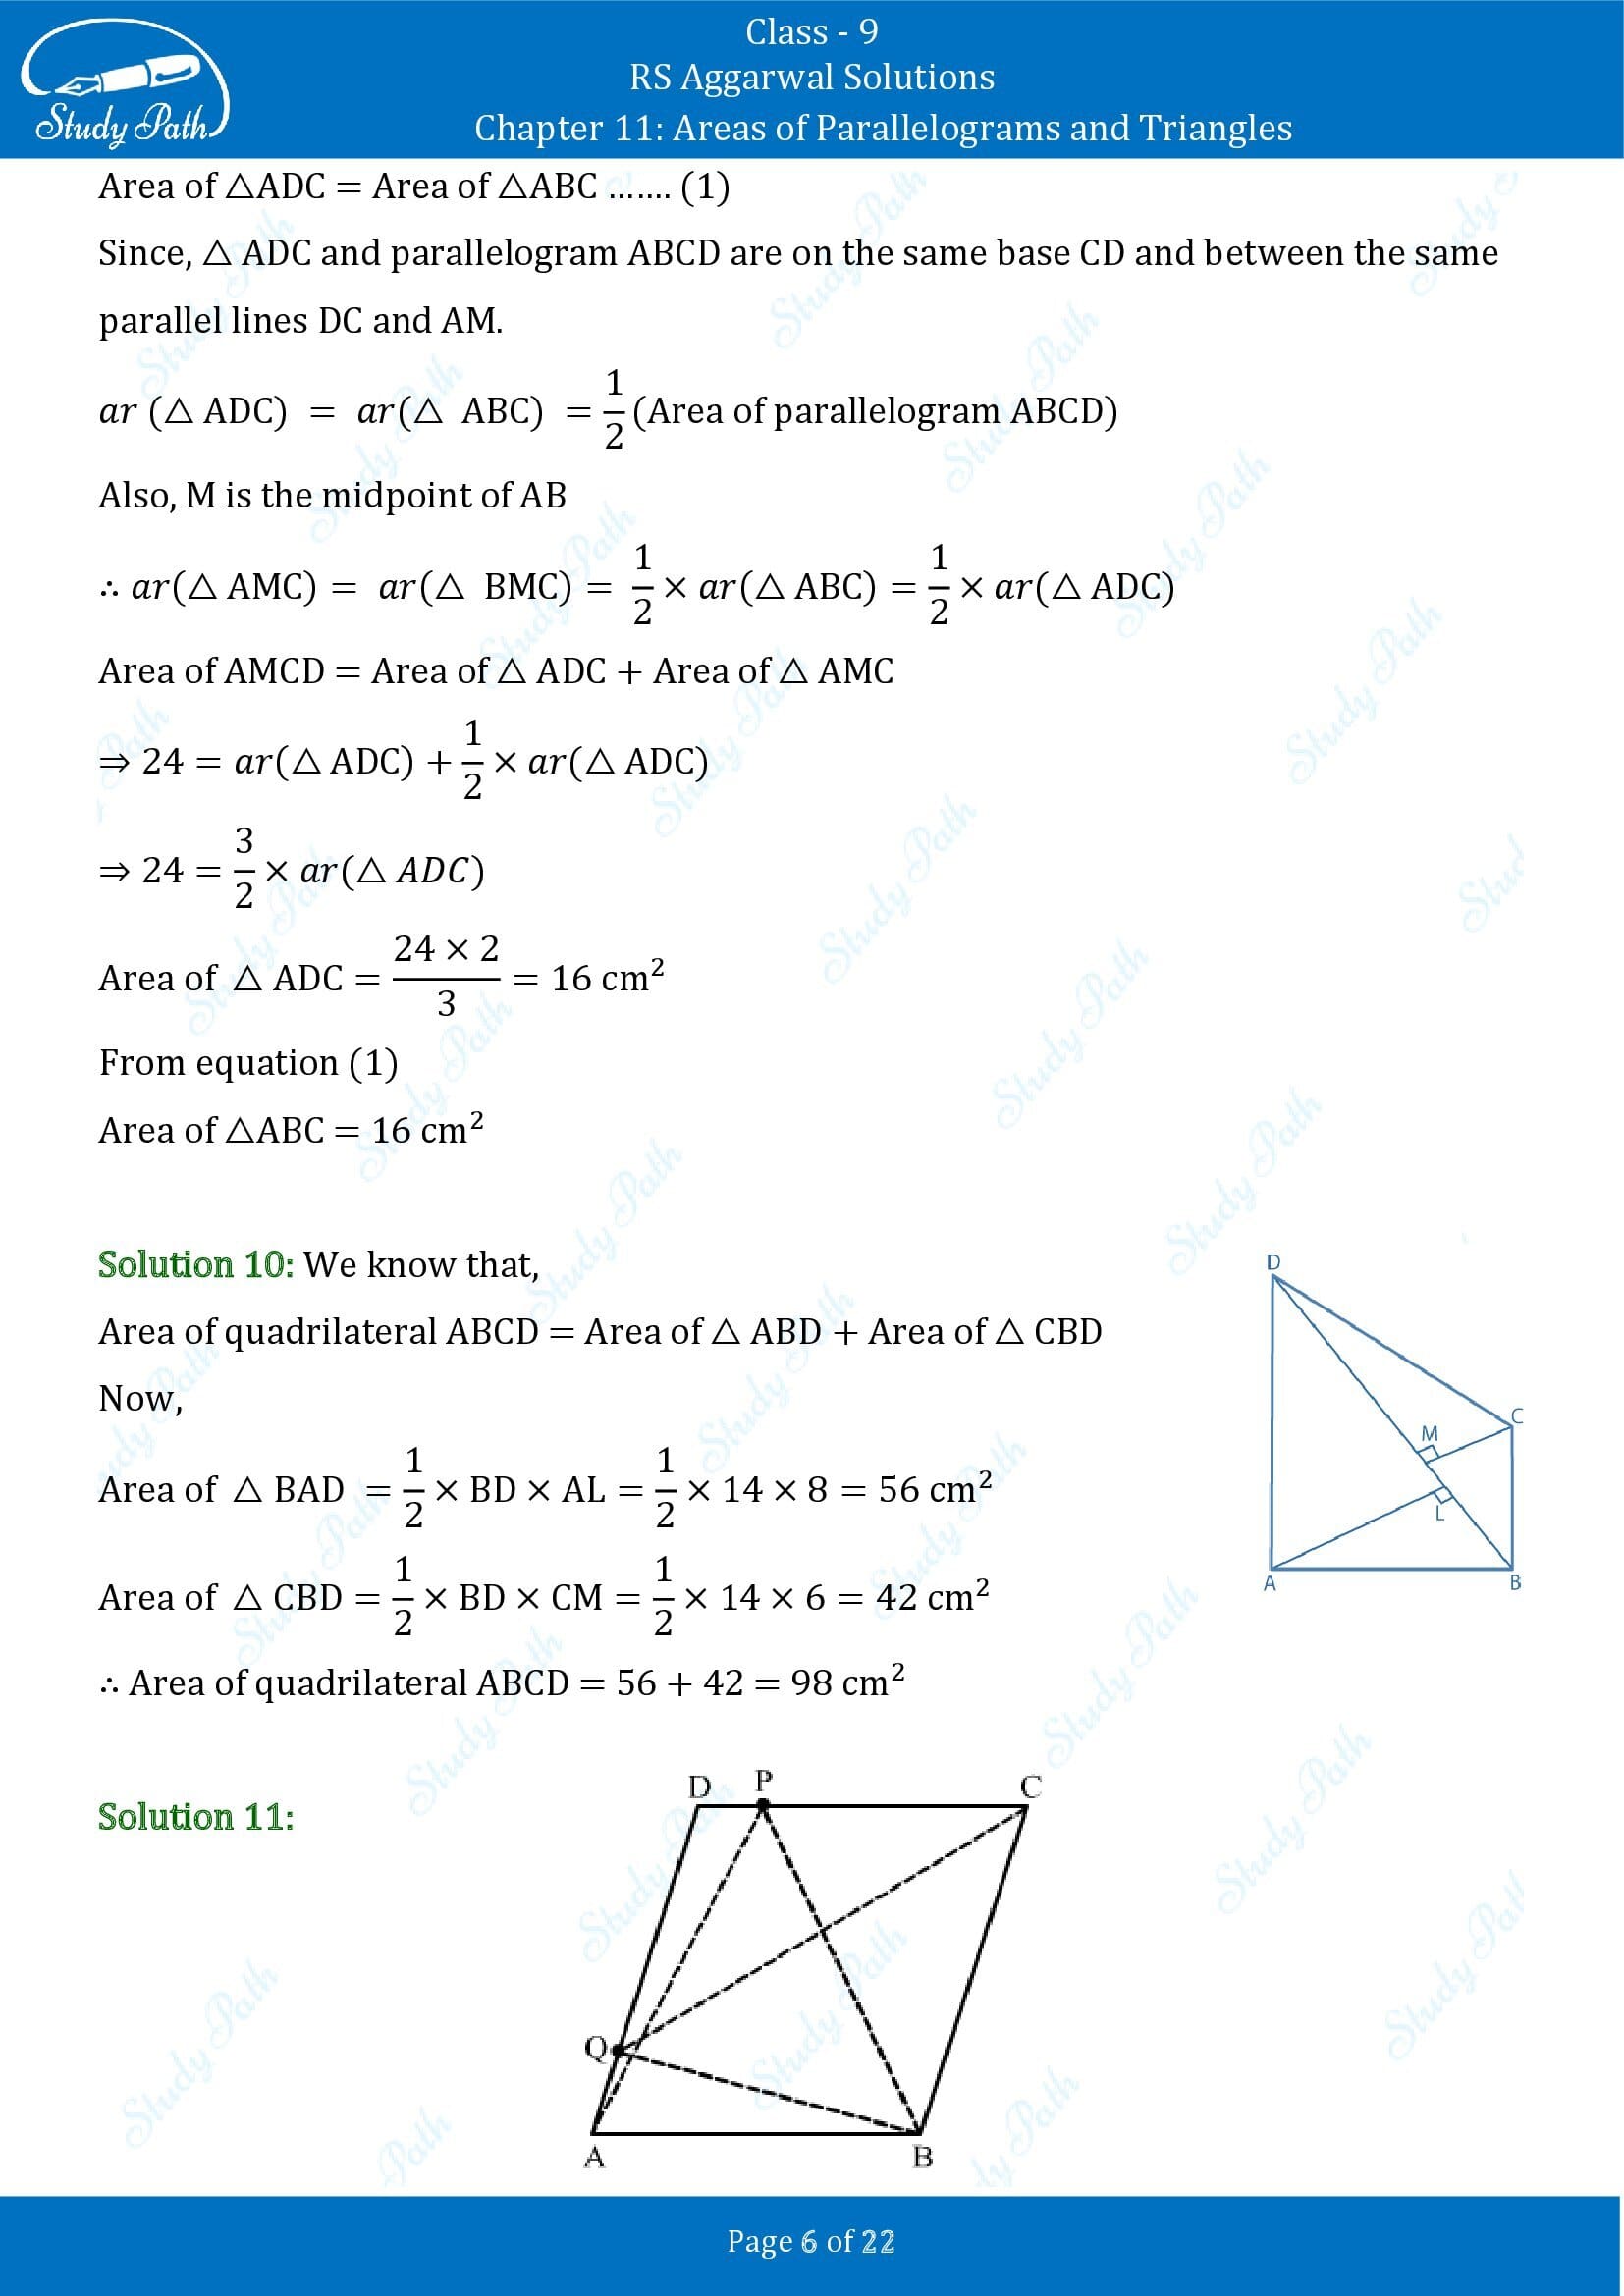 RS Aggarwal Solutions Class 9 Chapter 11 Areas of Parallelograms and Triangles Exercise 11 00006